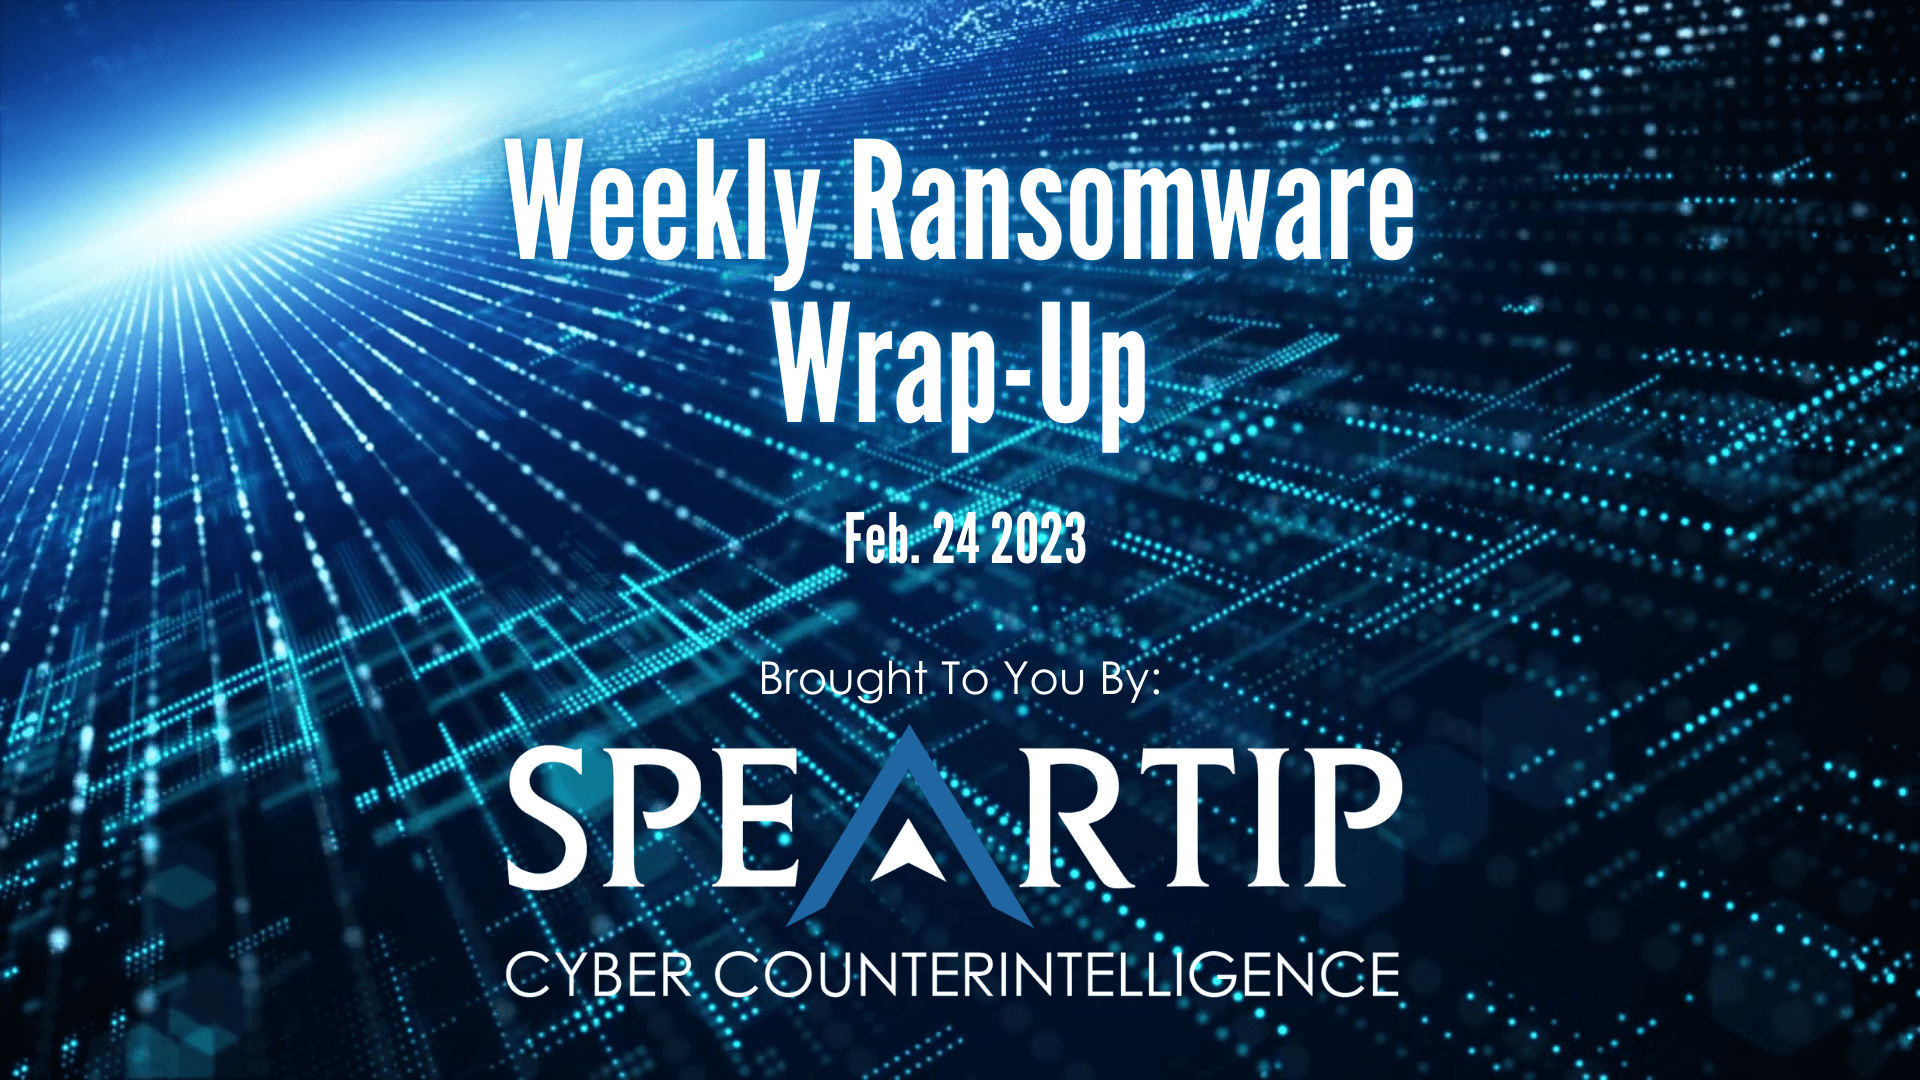 February 24, 2023 Ransomware Wrap-Up